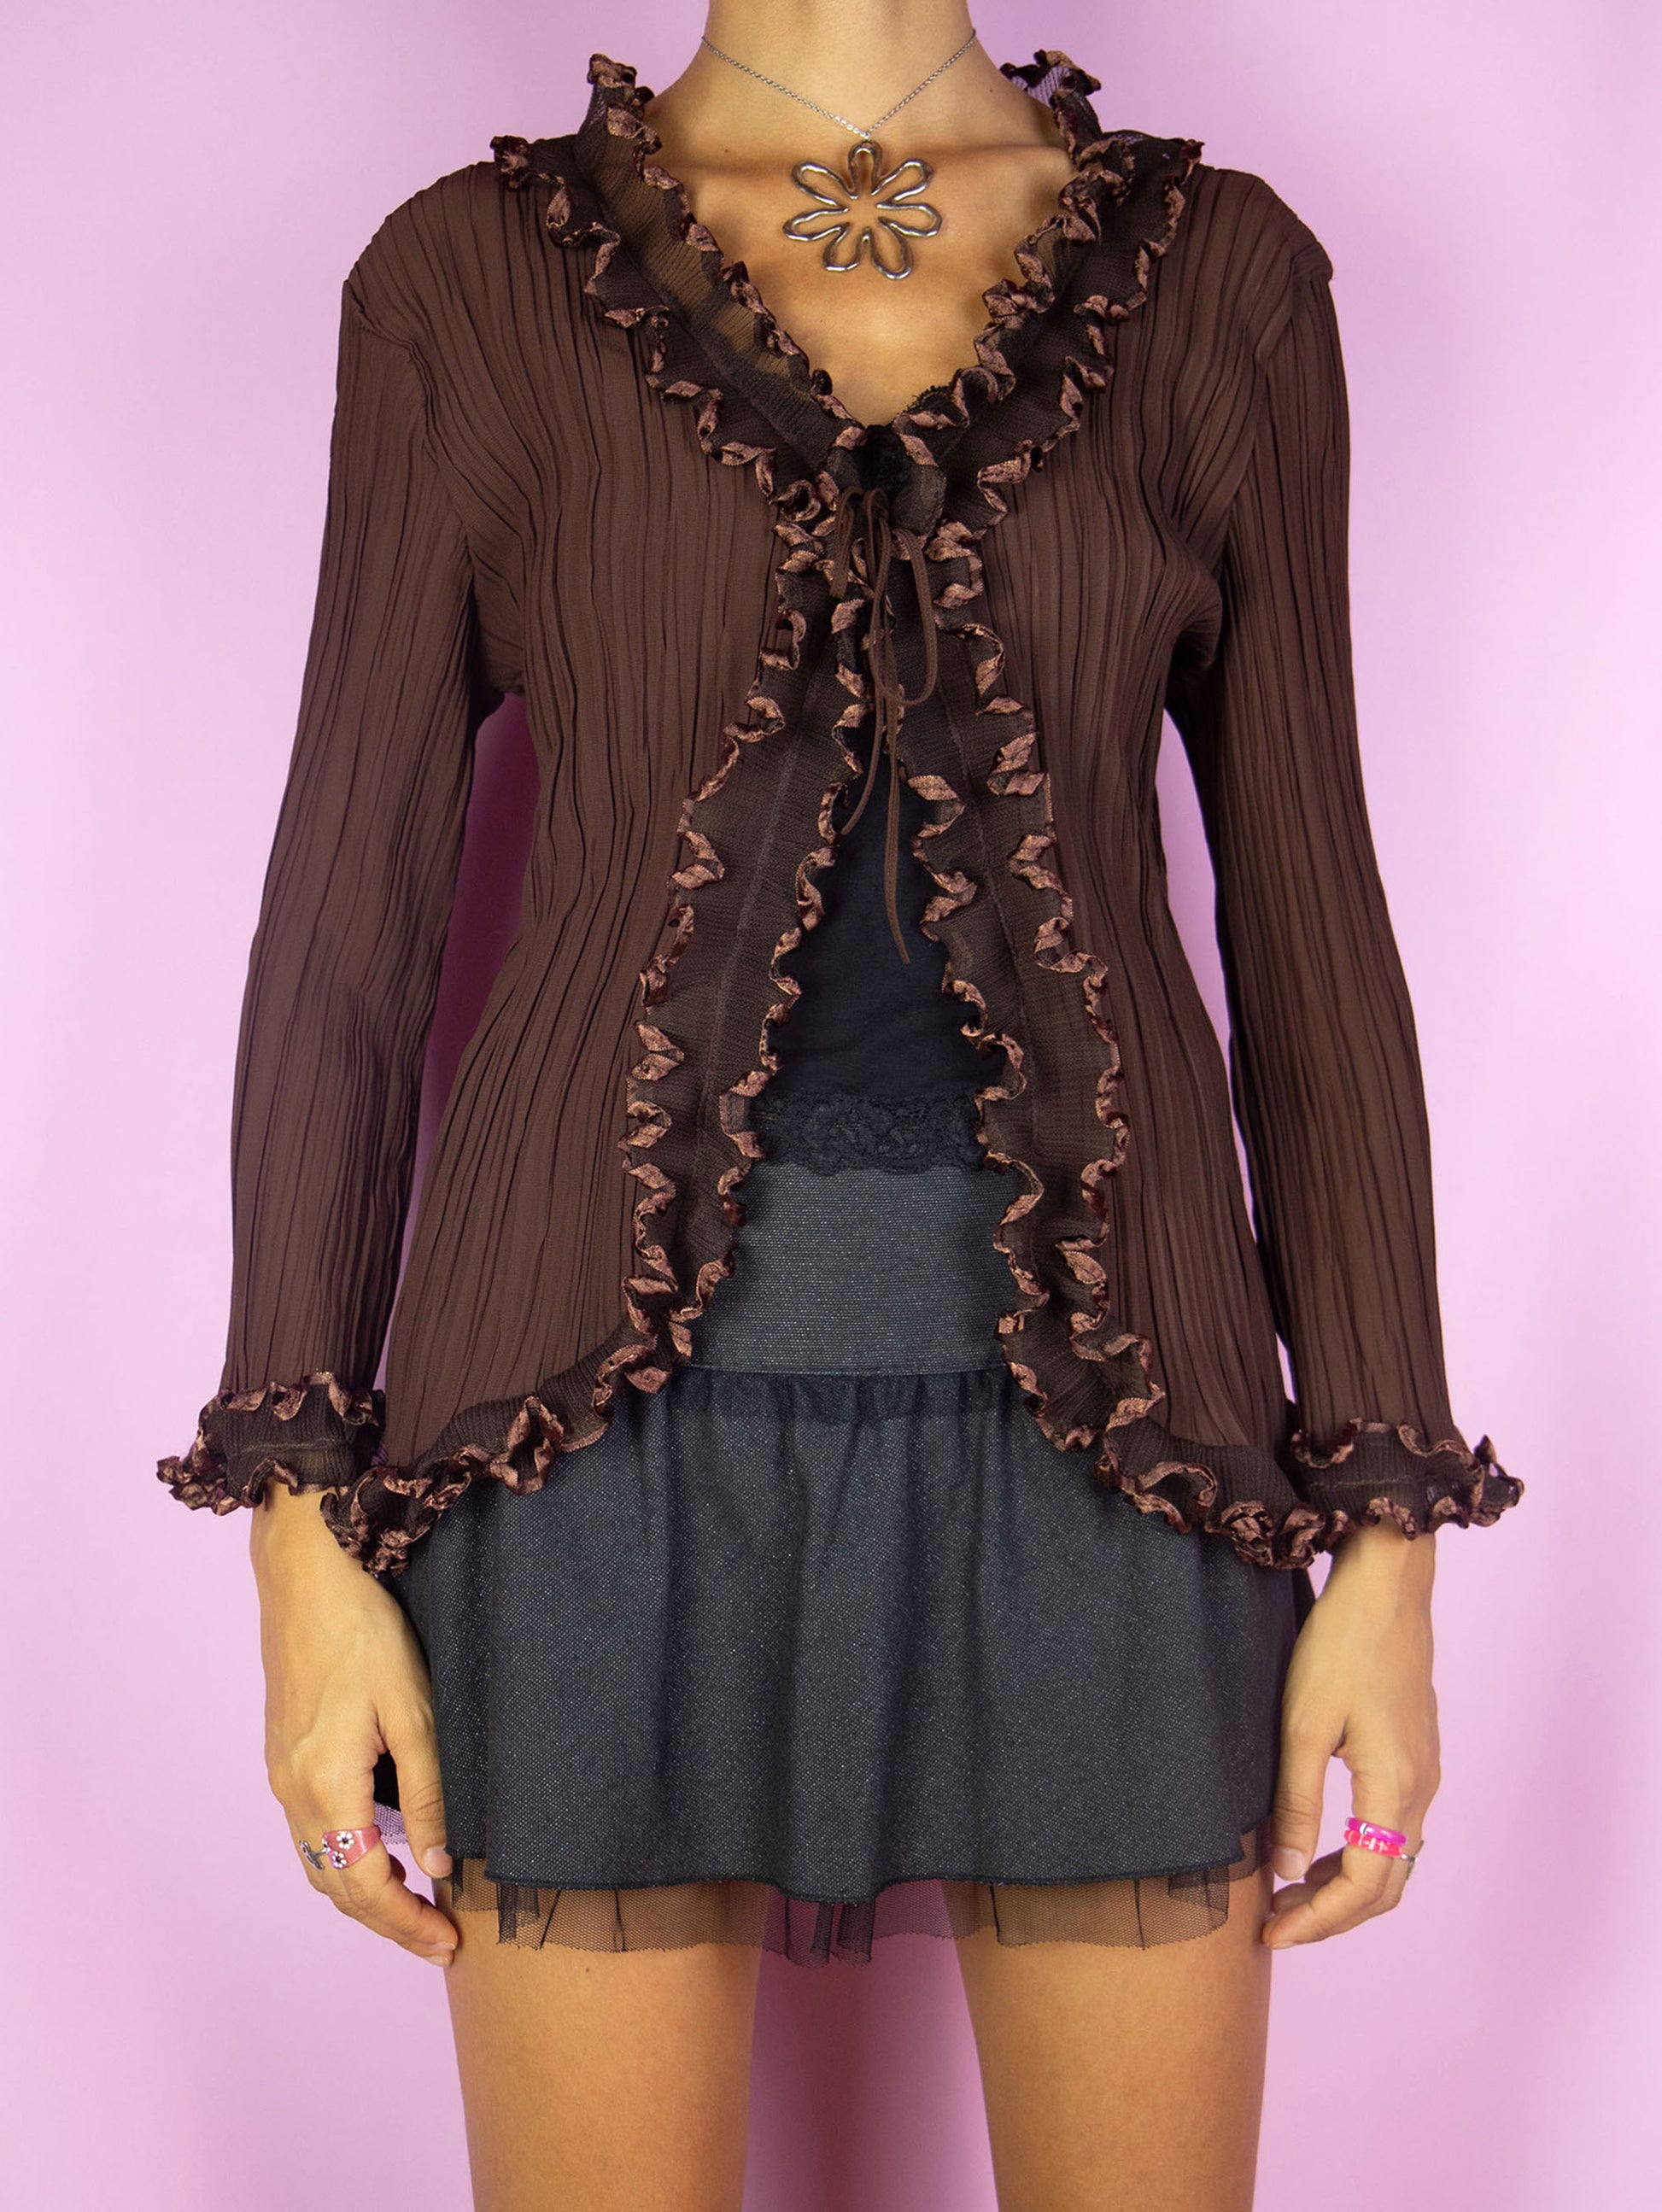 The Y2K Dark Brown Ruffle Blouse is a vintage pleated dark brown tied front top with ruched ruffle details. Avant garde boho fairy grunge 2000s bolero jacket.